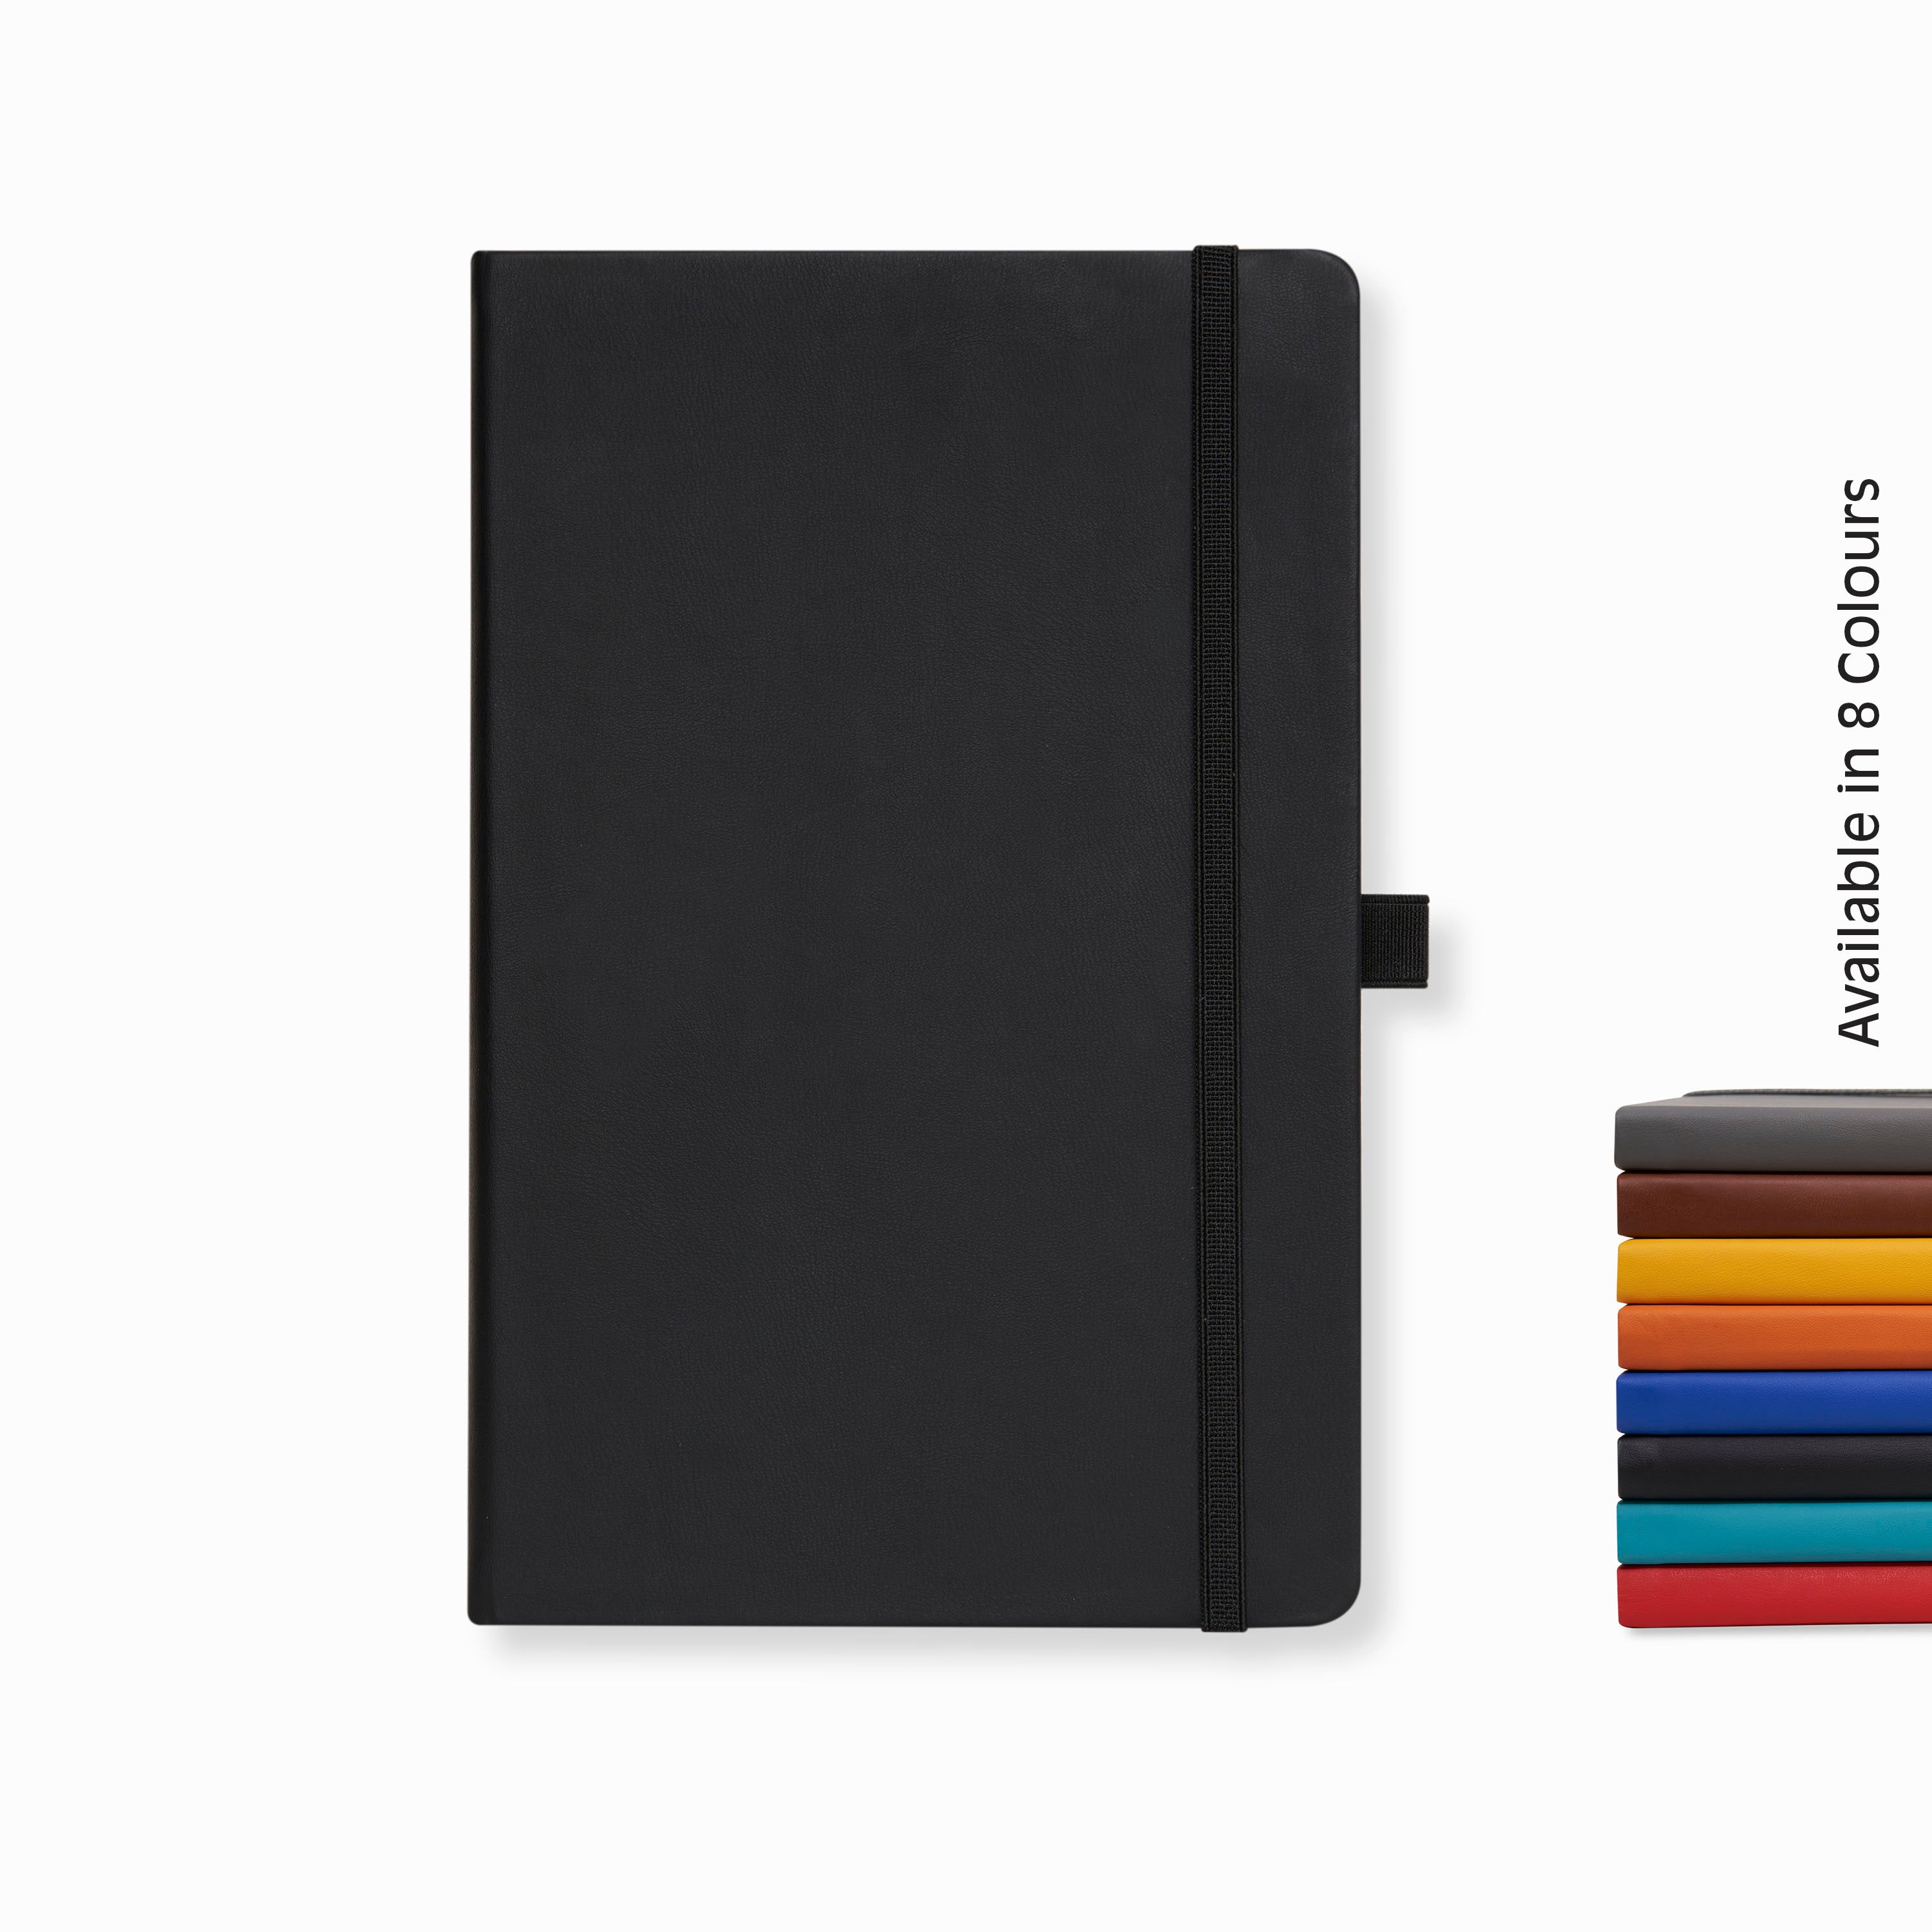 Pro Series Executive A5 PU Leather Hardbound Unruled Diary with Pen Loop - Black